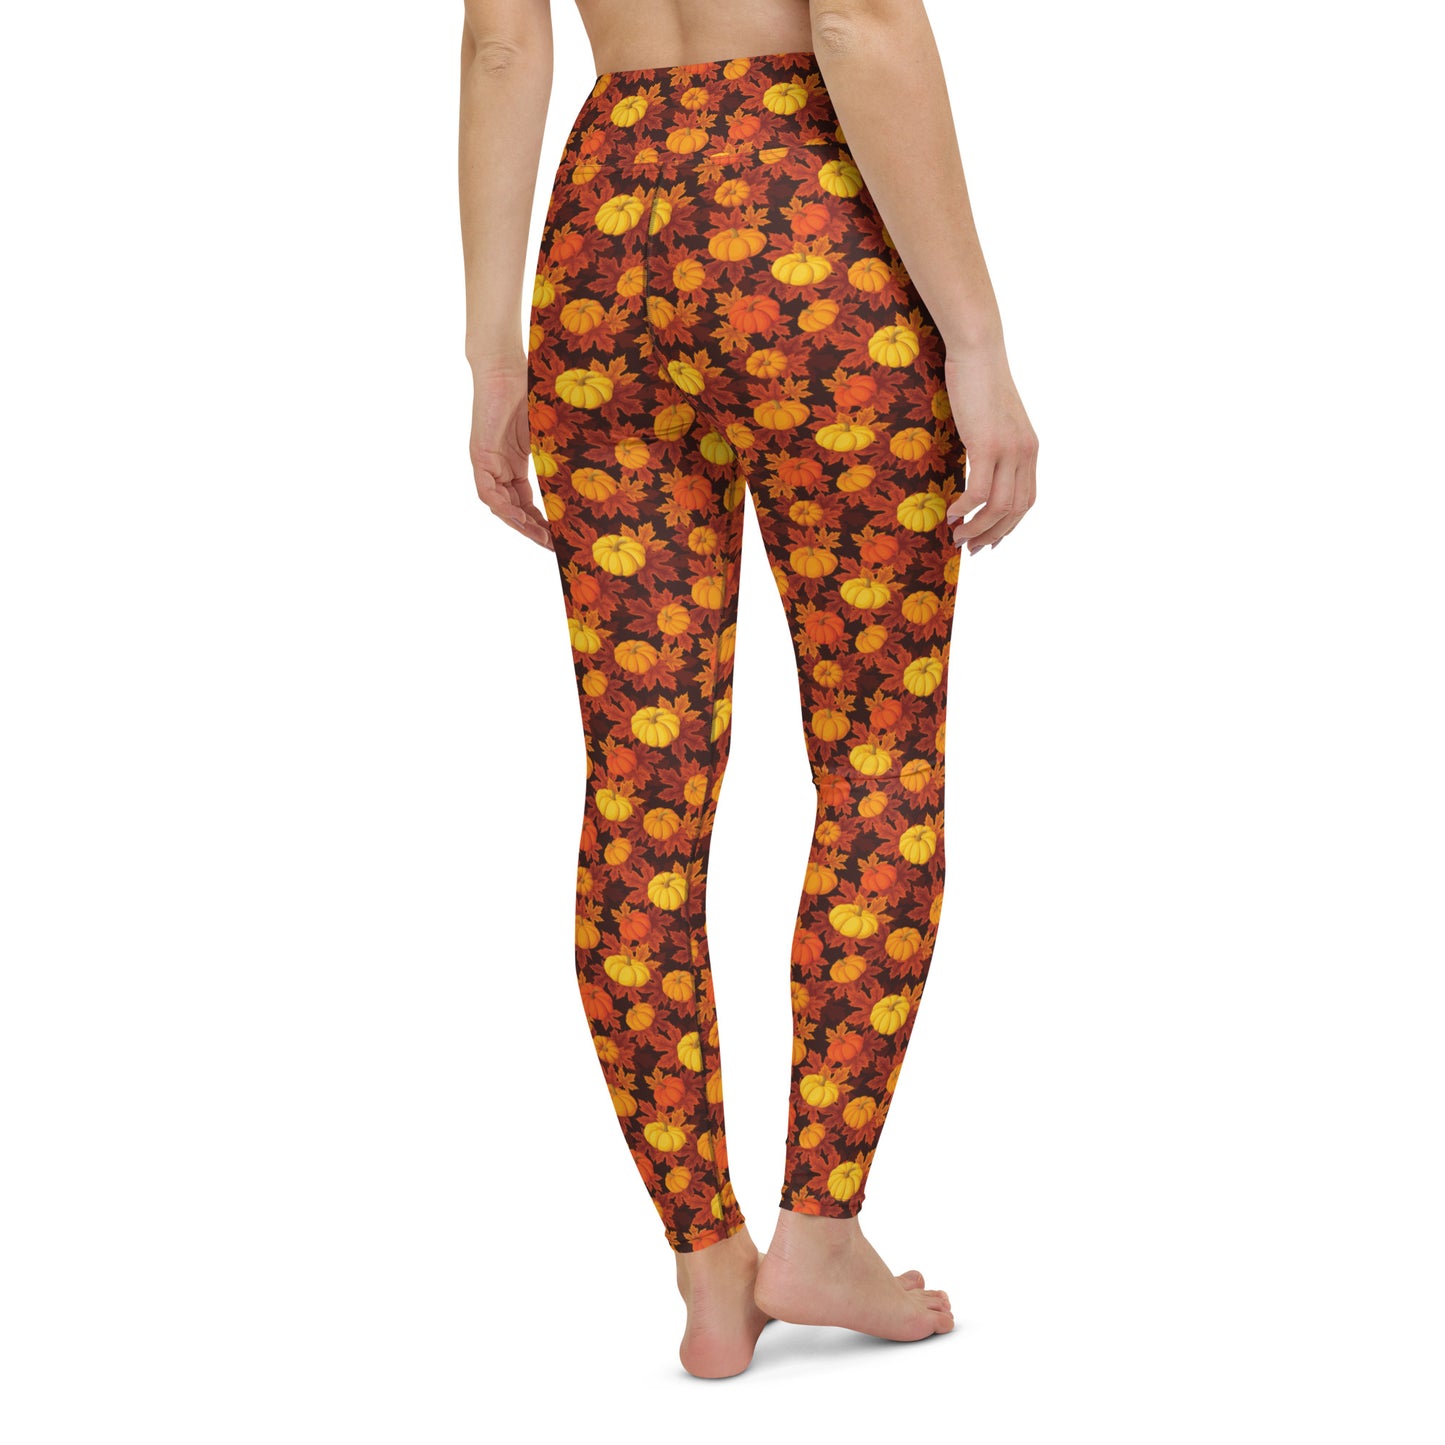 Pumpkins Fall Leaves Yoga Leggings Women, Autumn Thanksgiving High Waisted Pants Cute Printed Graphic Workout Designer Tights Starcove Fashion